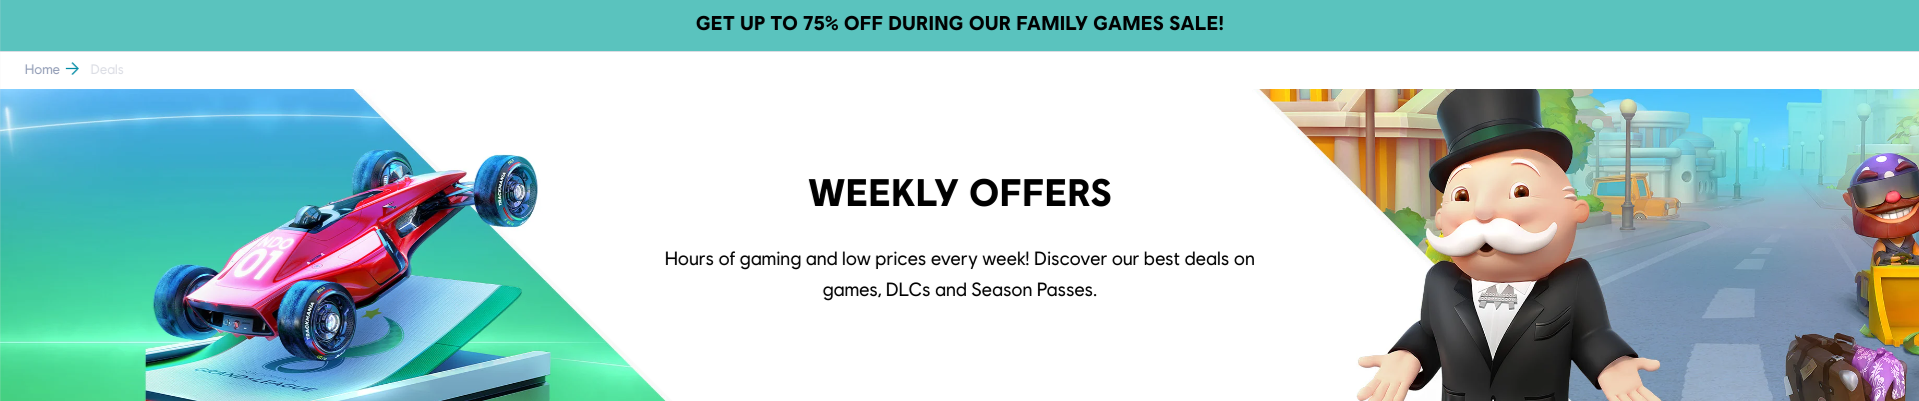 Family Games Discount on the Ubisoft Store